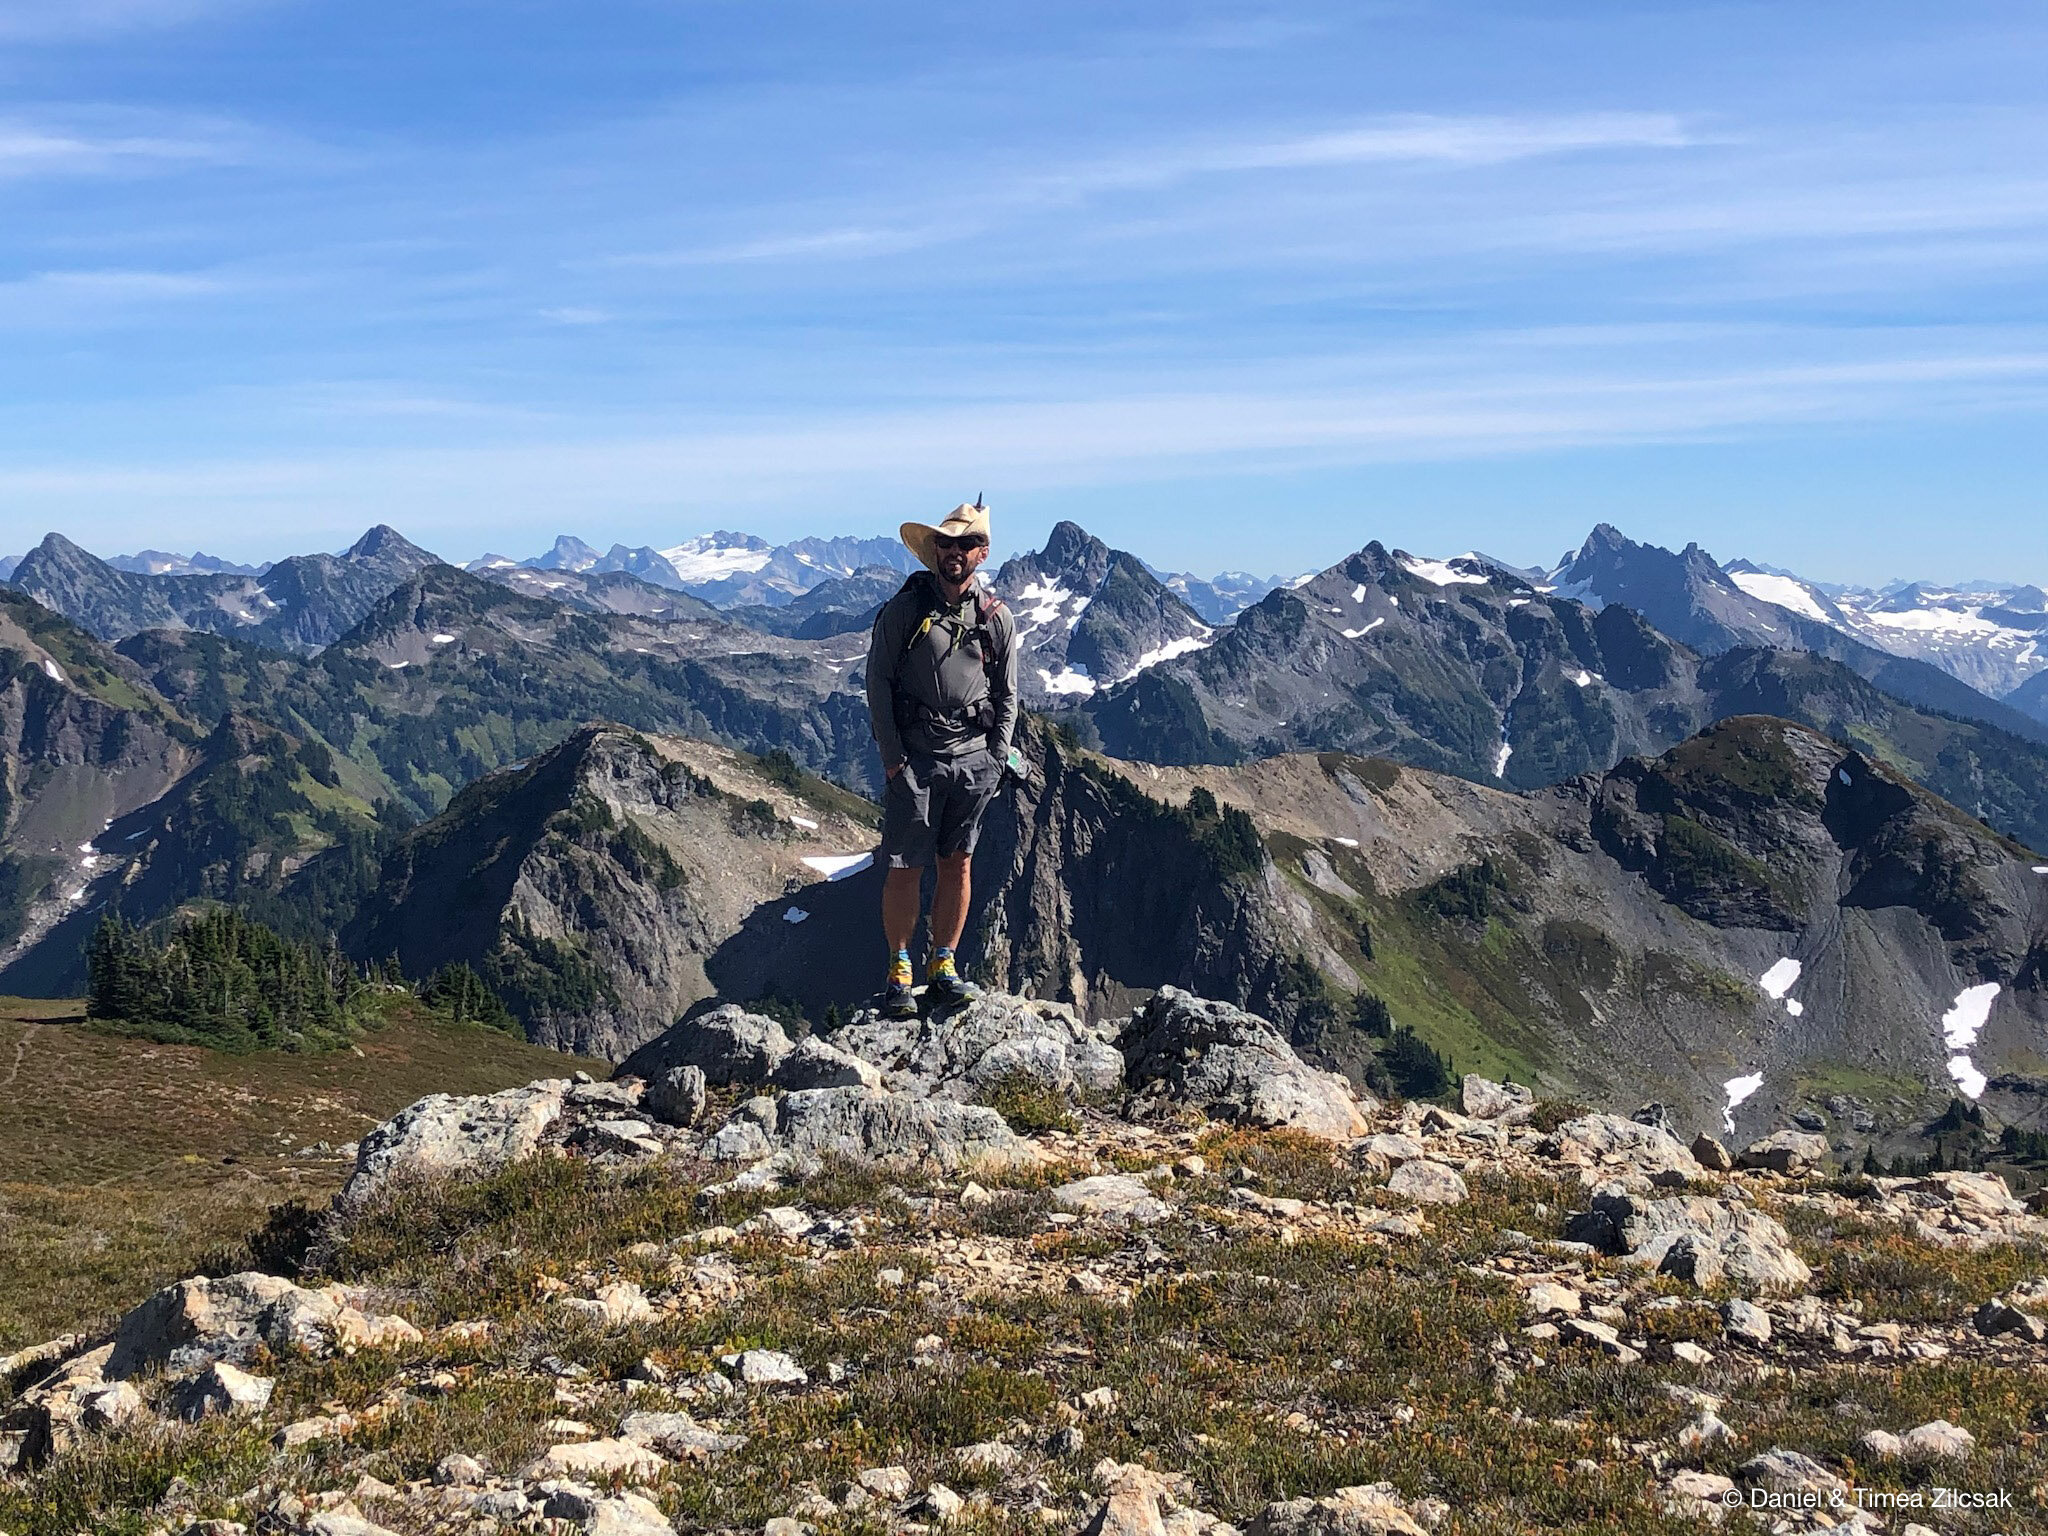 Views while backpacking the North Cascades